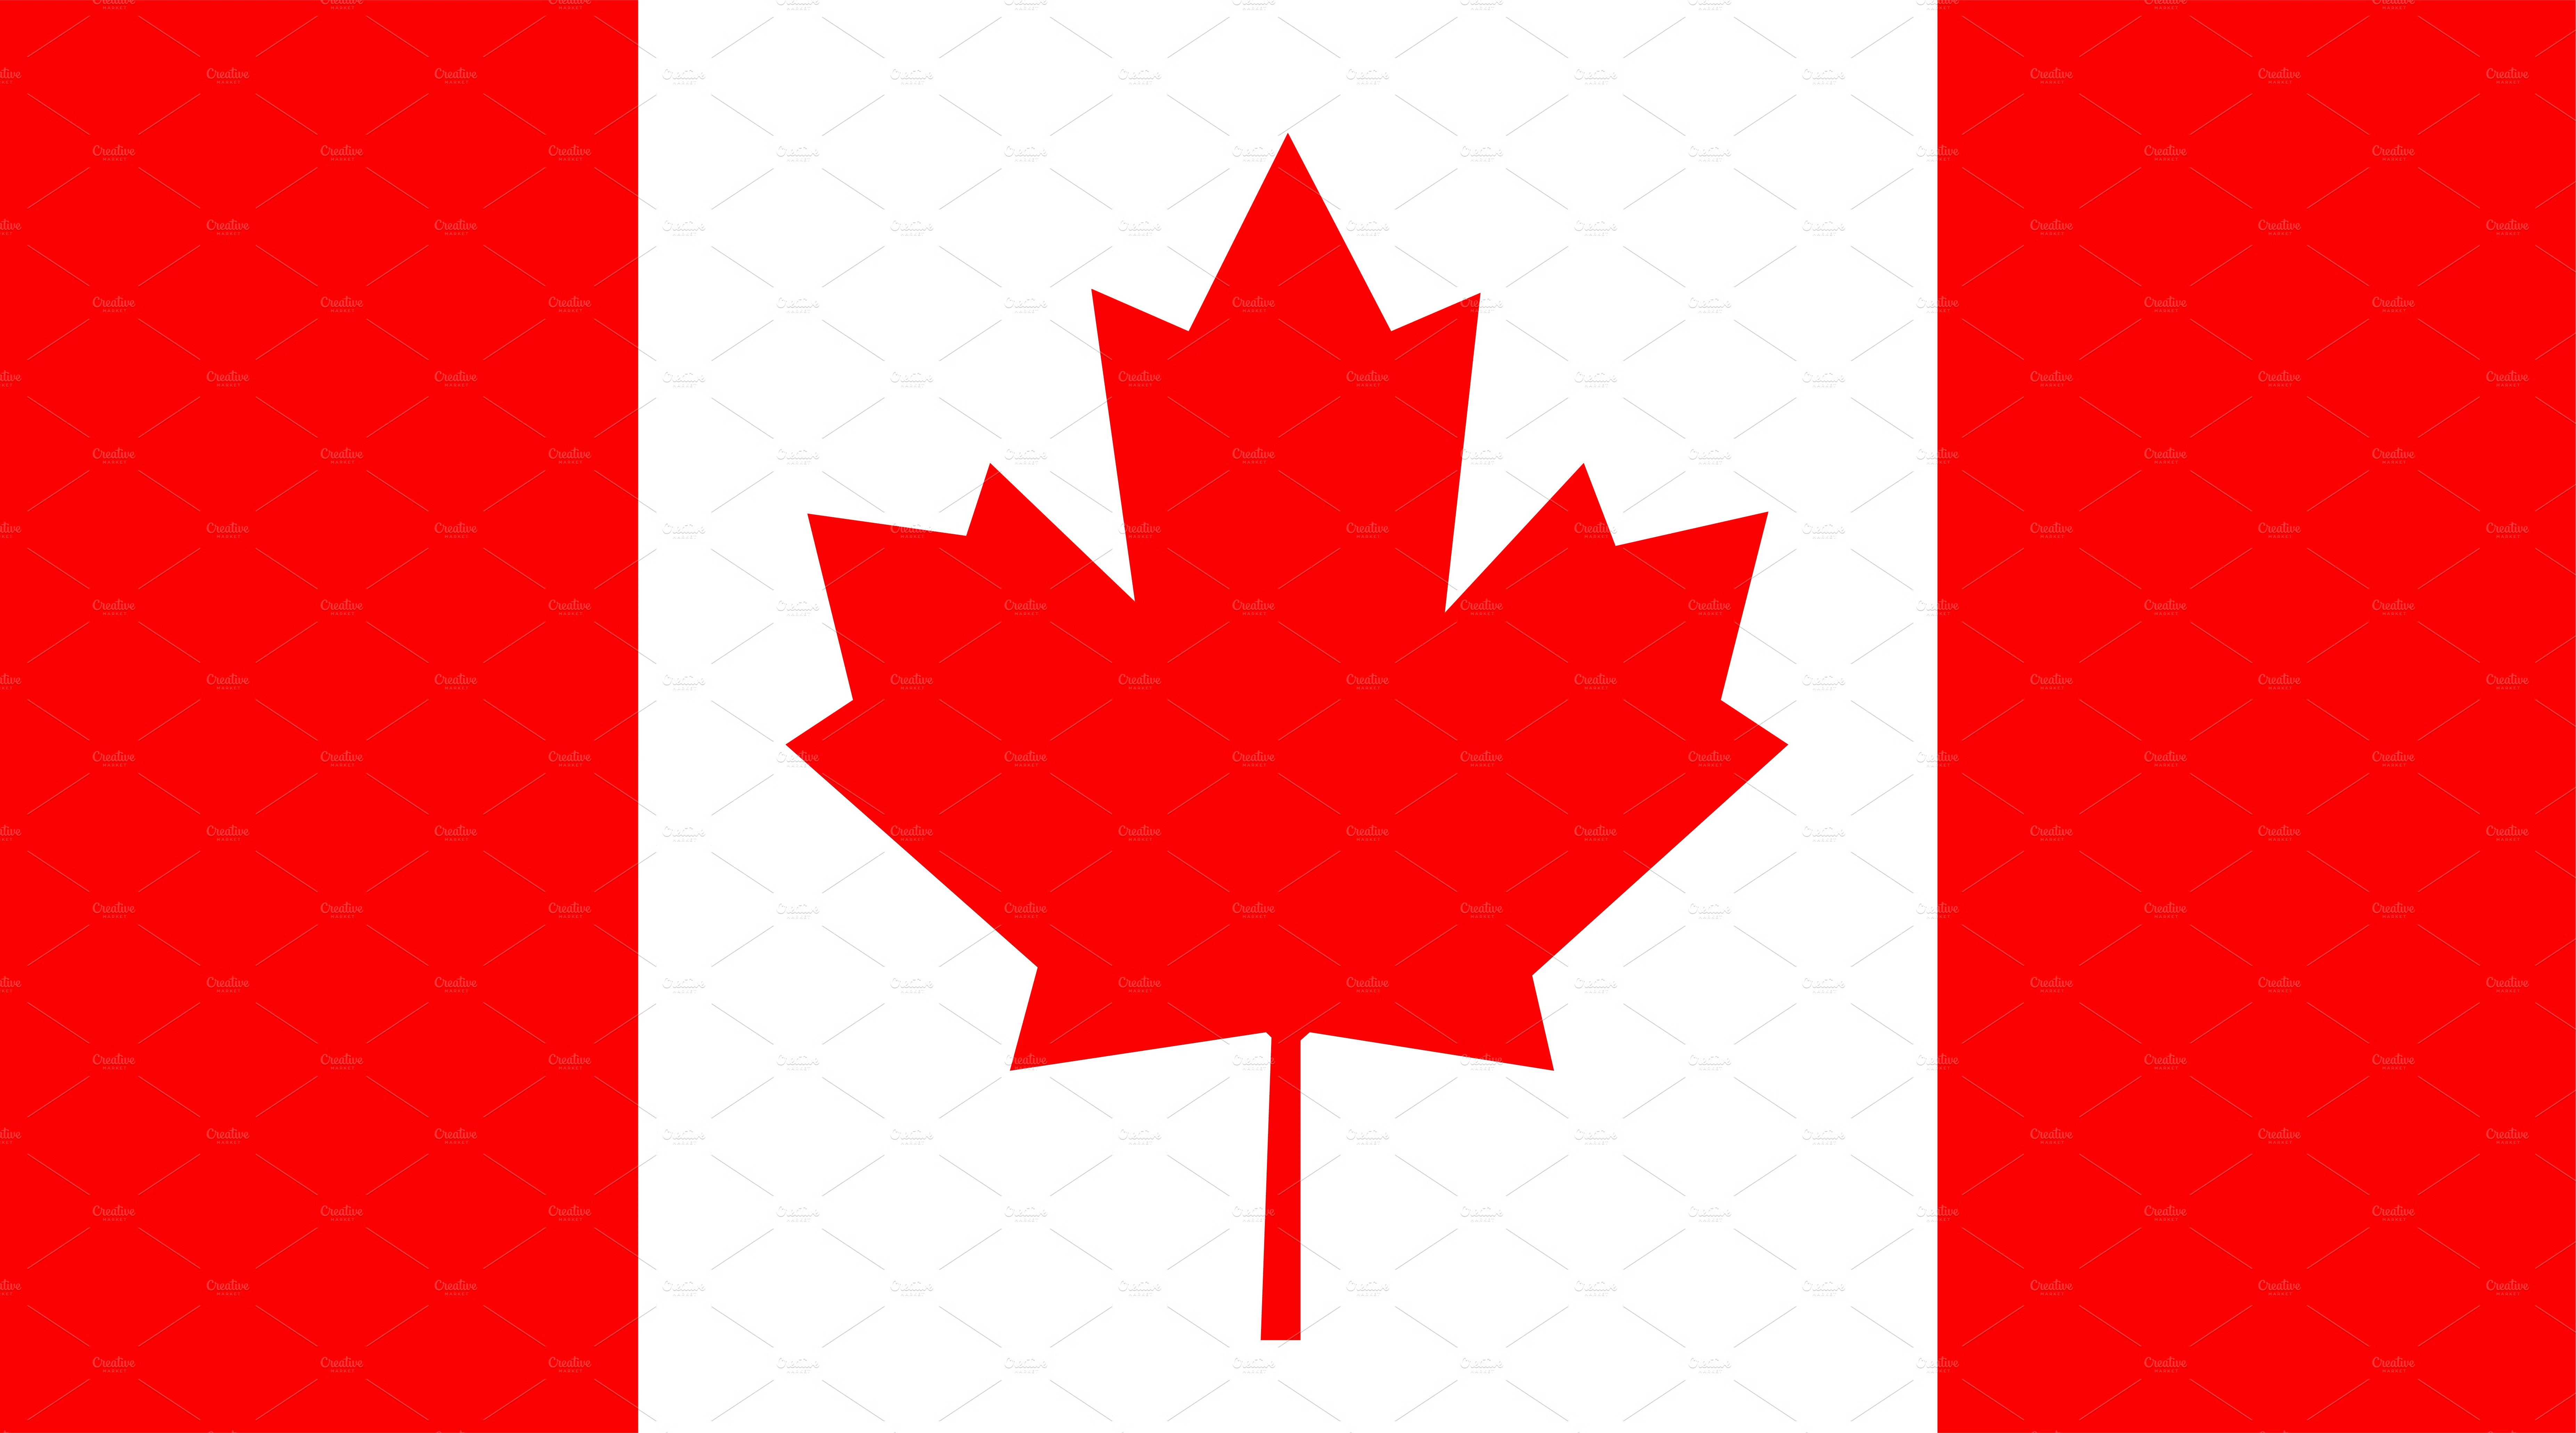 <p style="color: white">Canada Office</p>